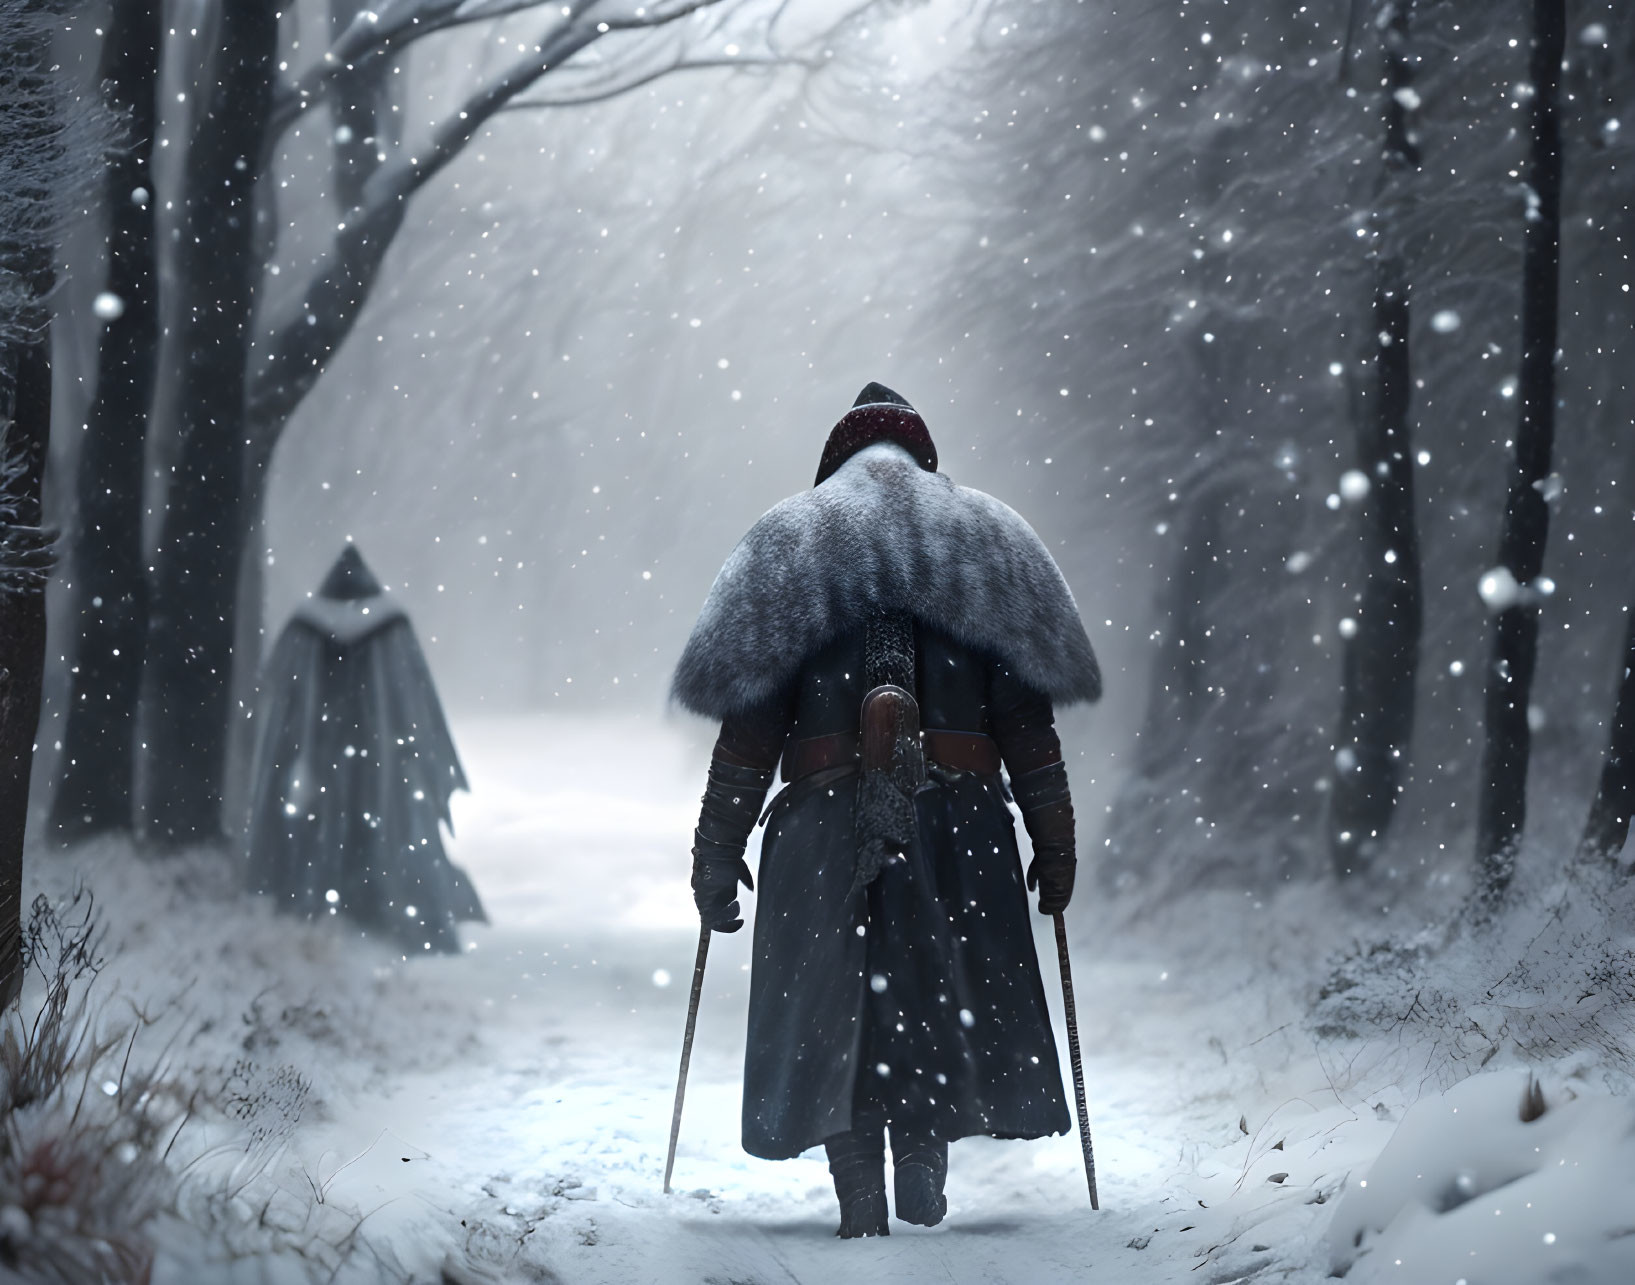 Medieval person in fur cloak walking in snow-covered forest path